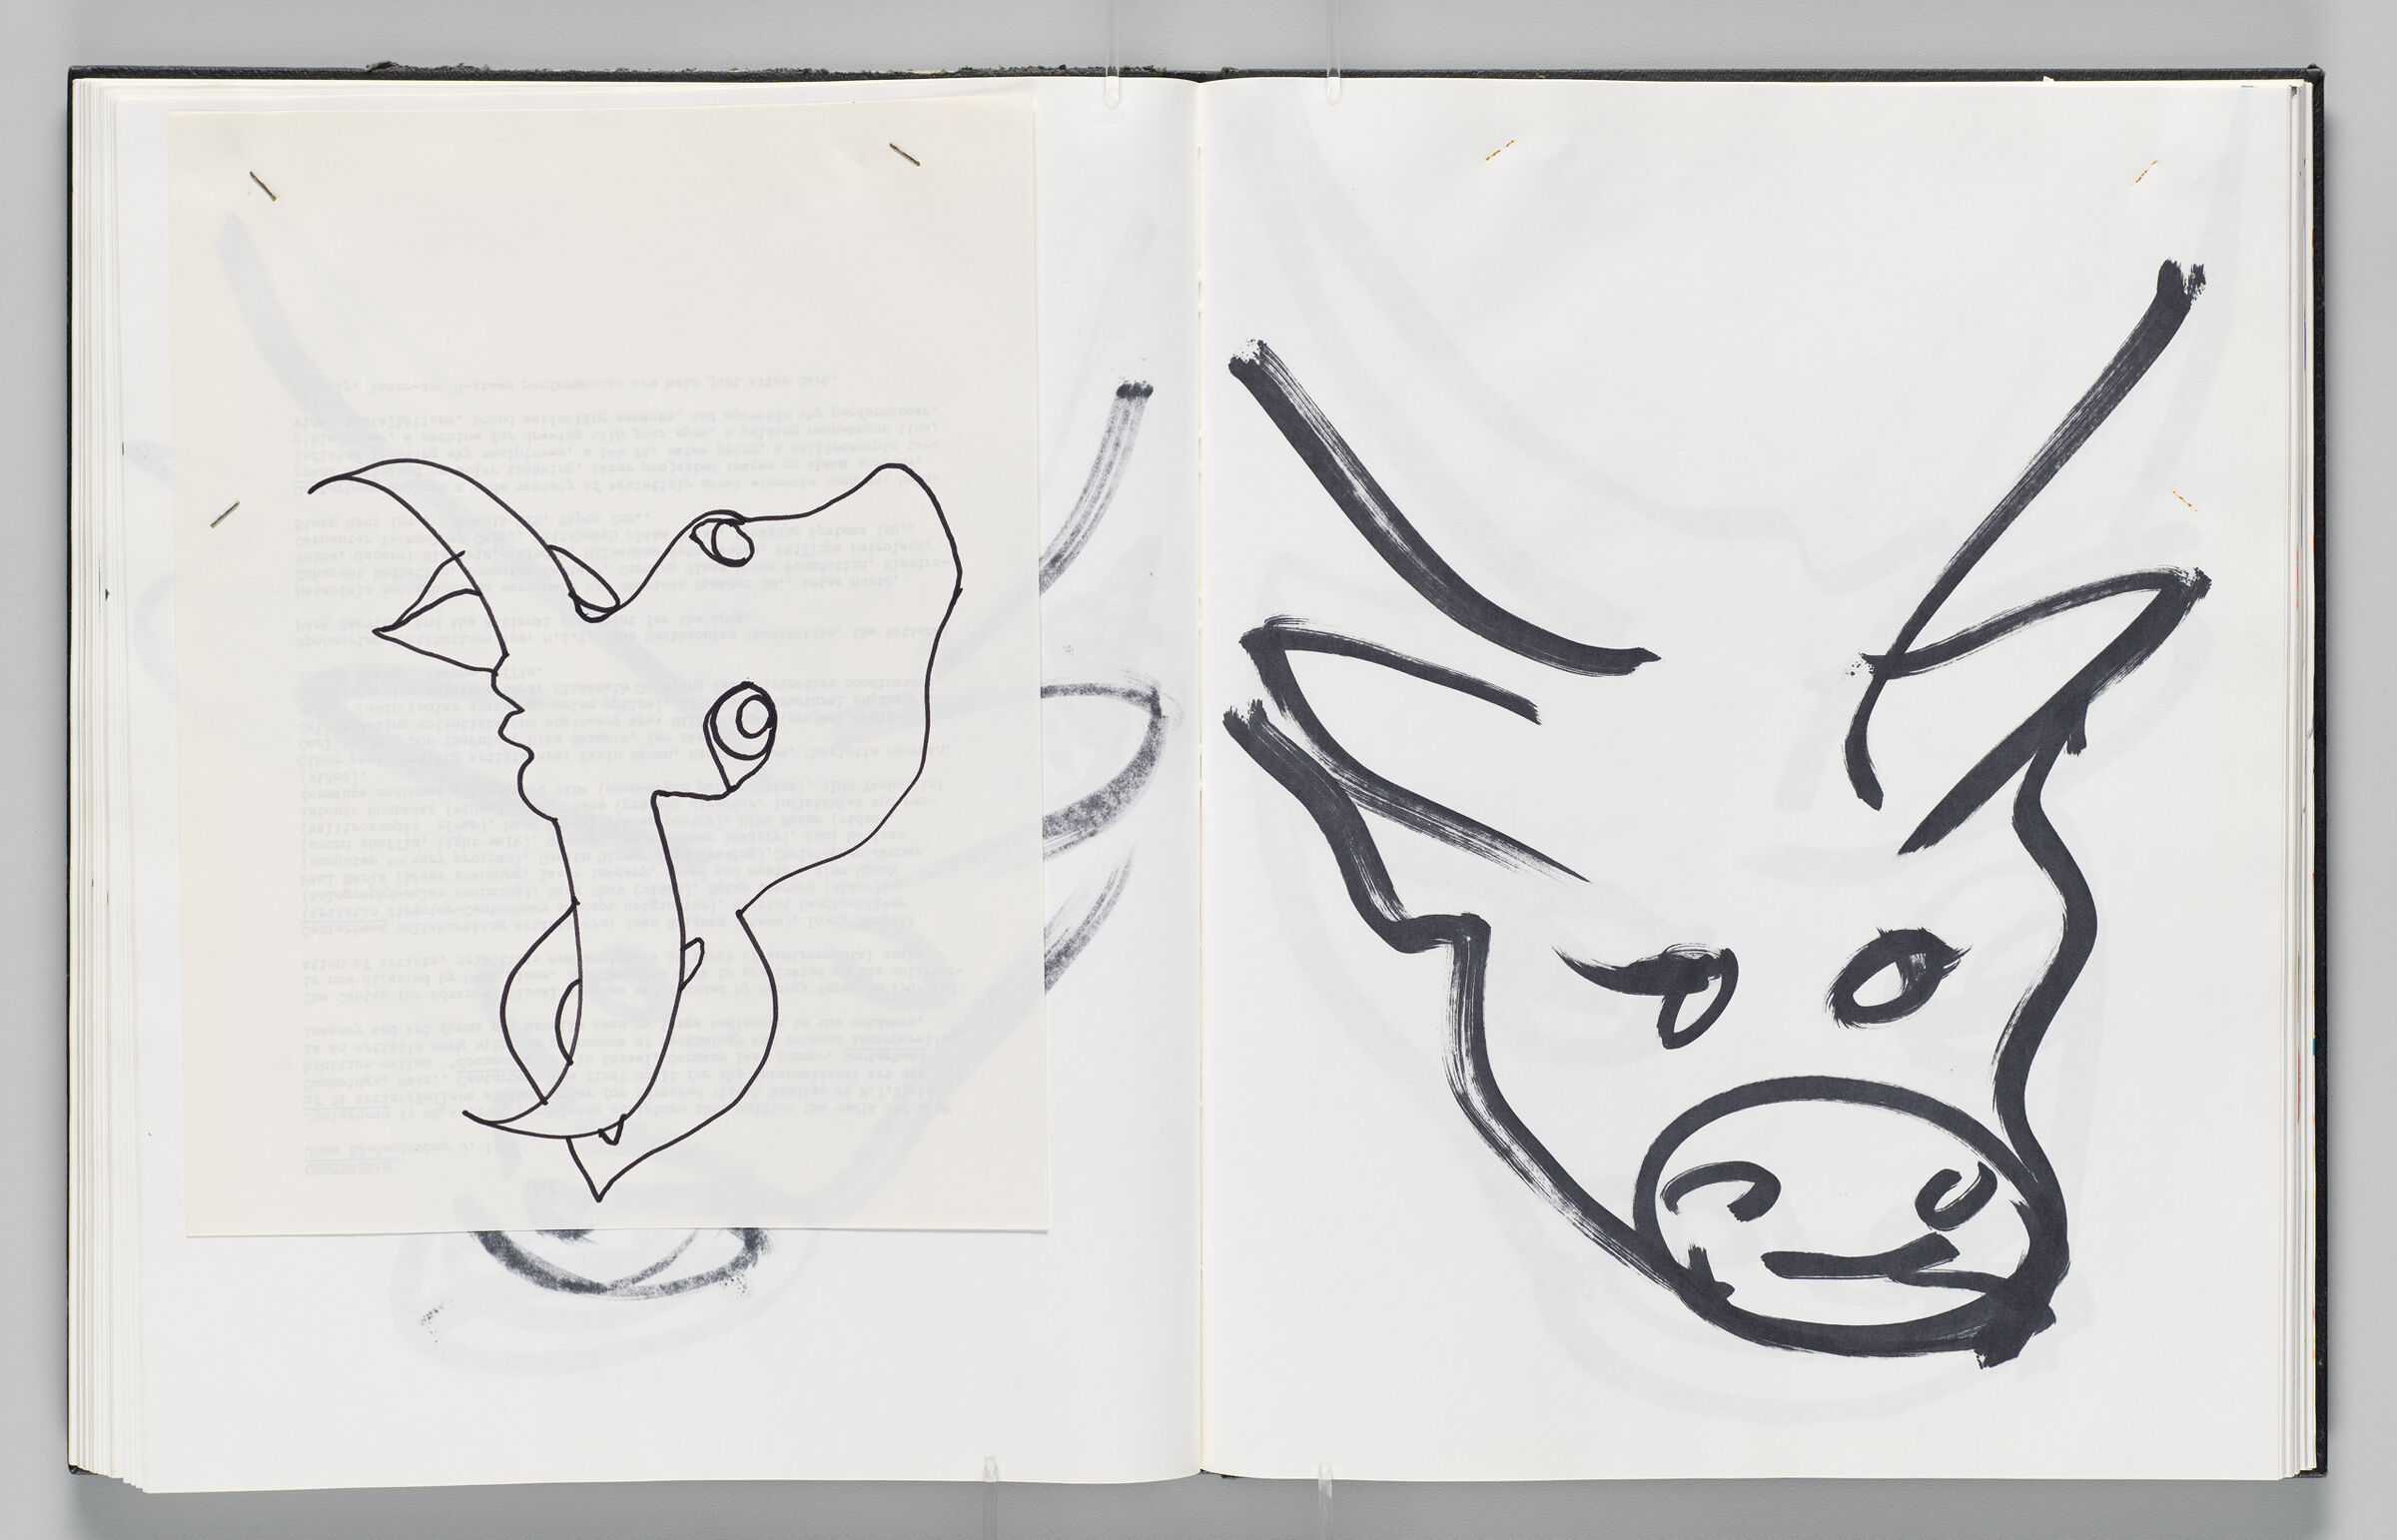 Untitled (Bleed-Through Of Previous Page With Stapled Sketch Of Minotaur Head, Left Page); Untitled (